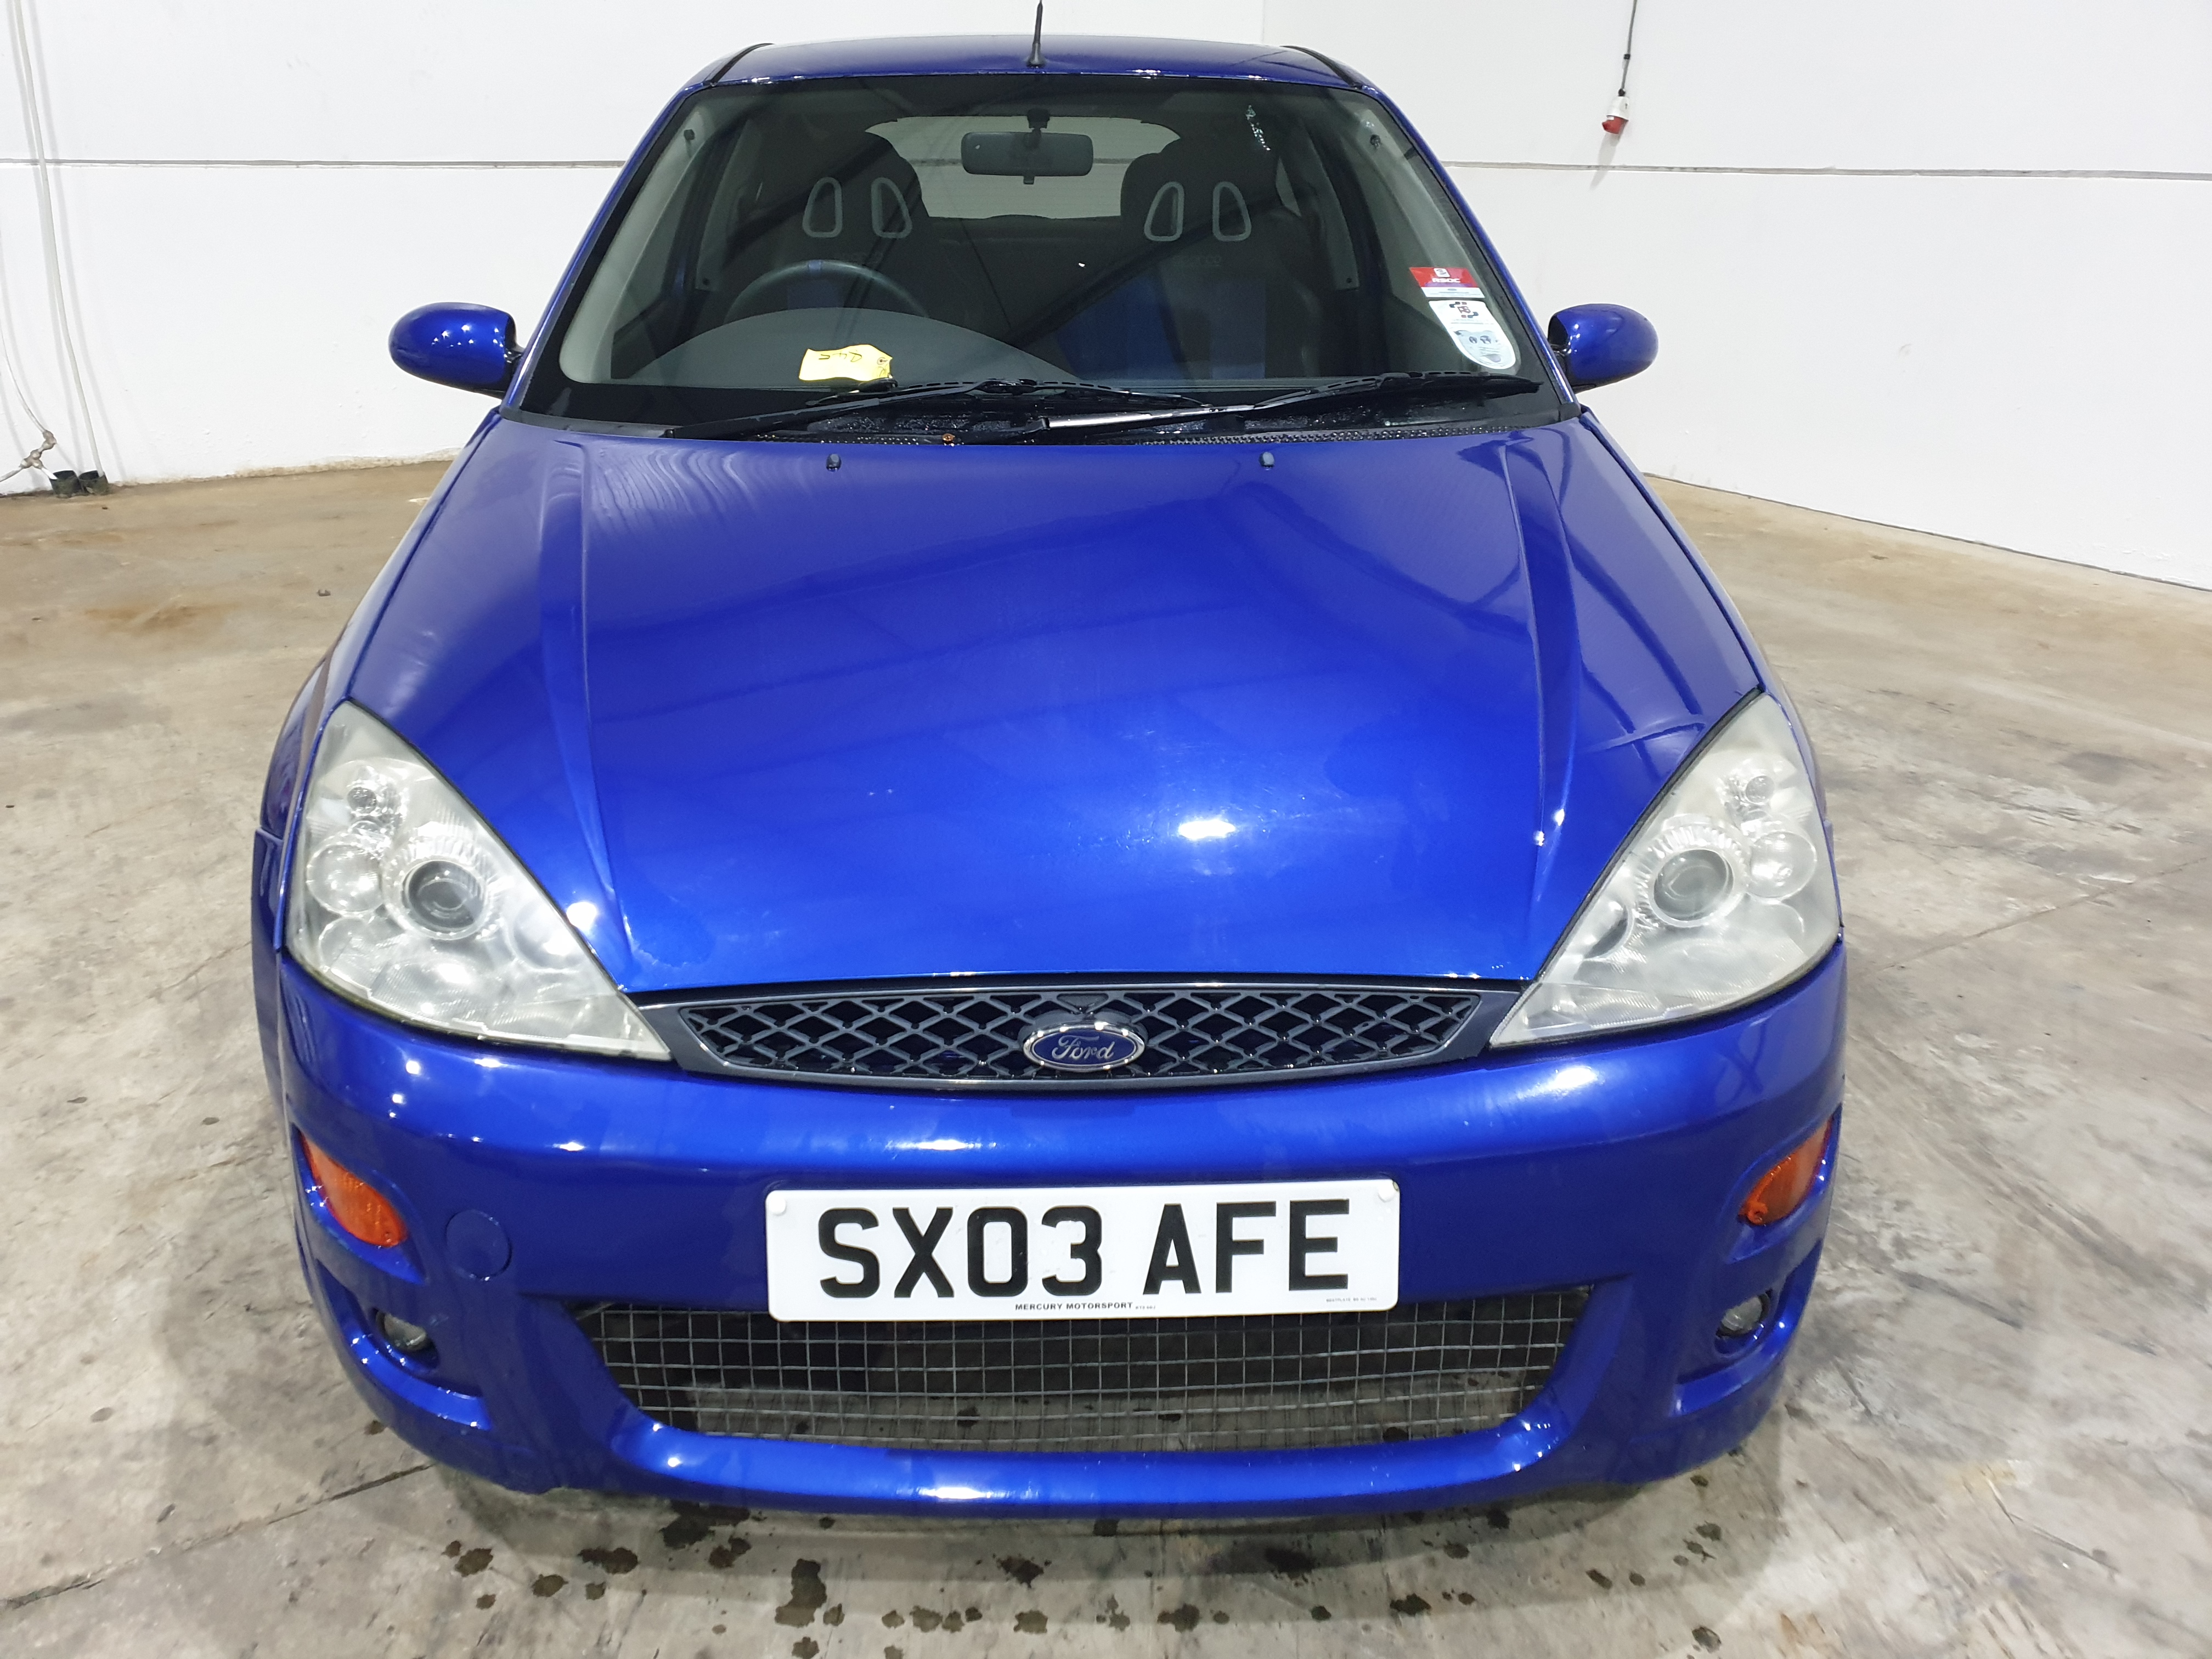 Ford Focus RS Mk1 - Image 8 of 13